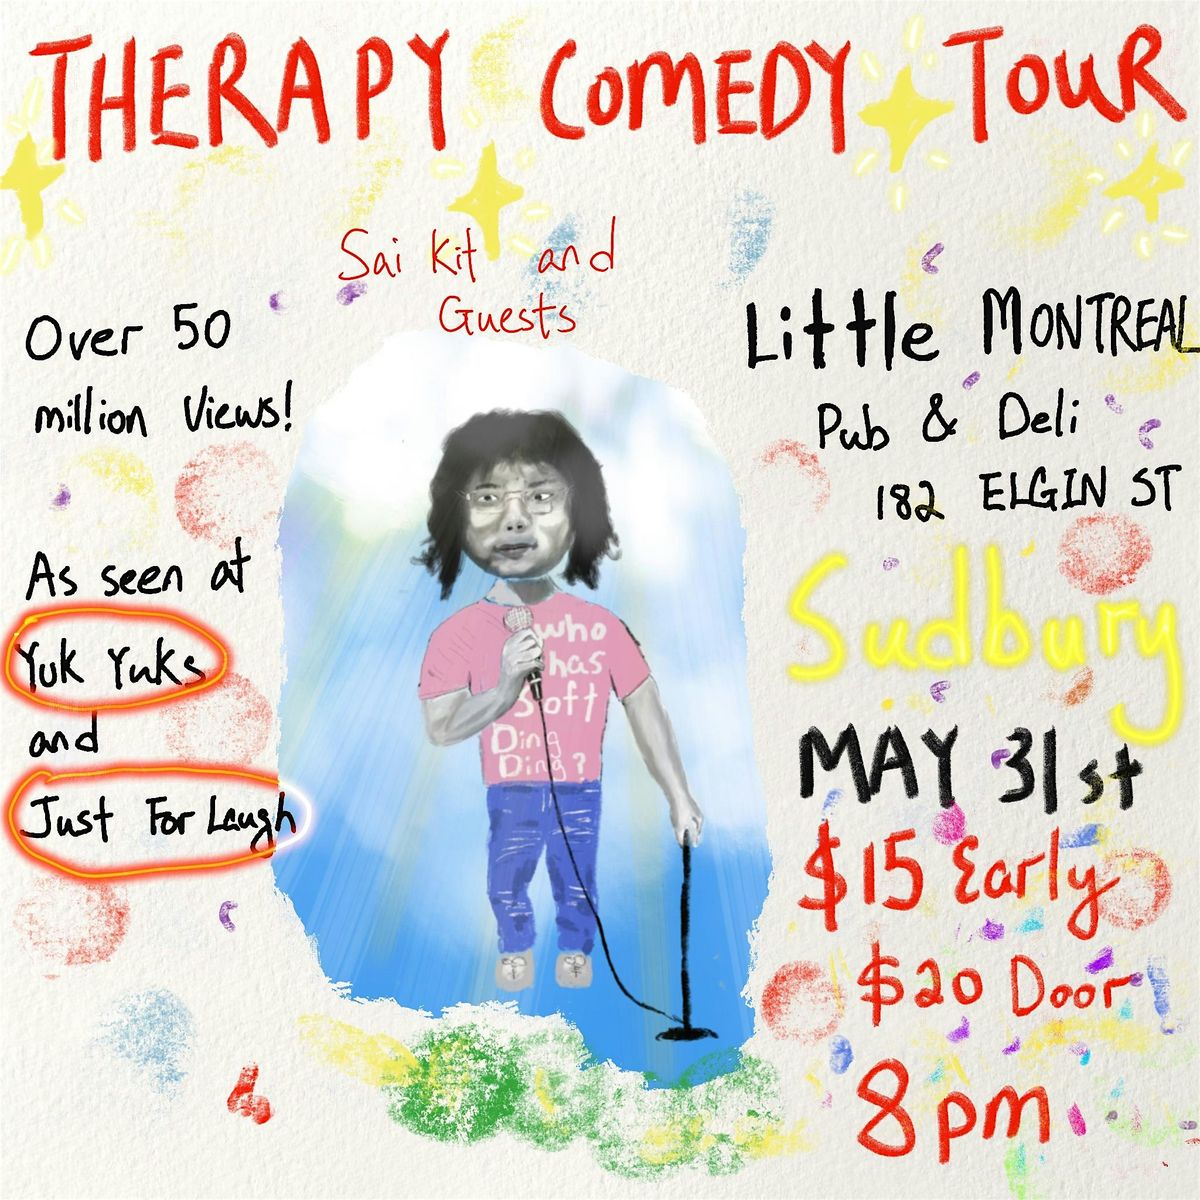 Stand Up Comedy in Sudbury, Ontario!